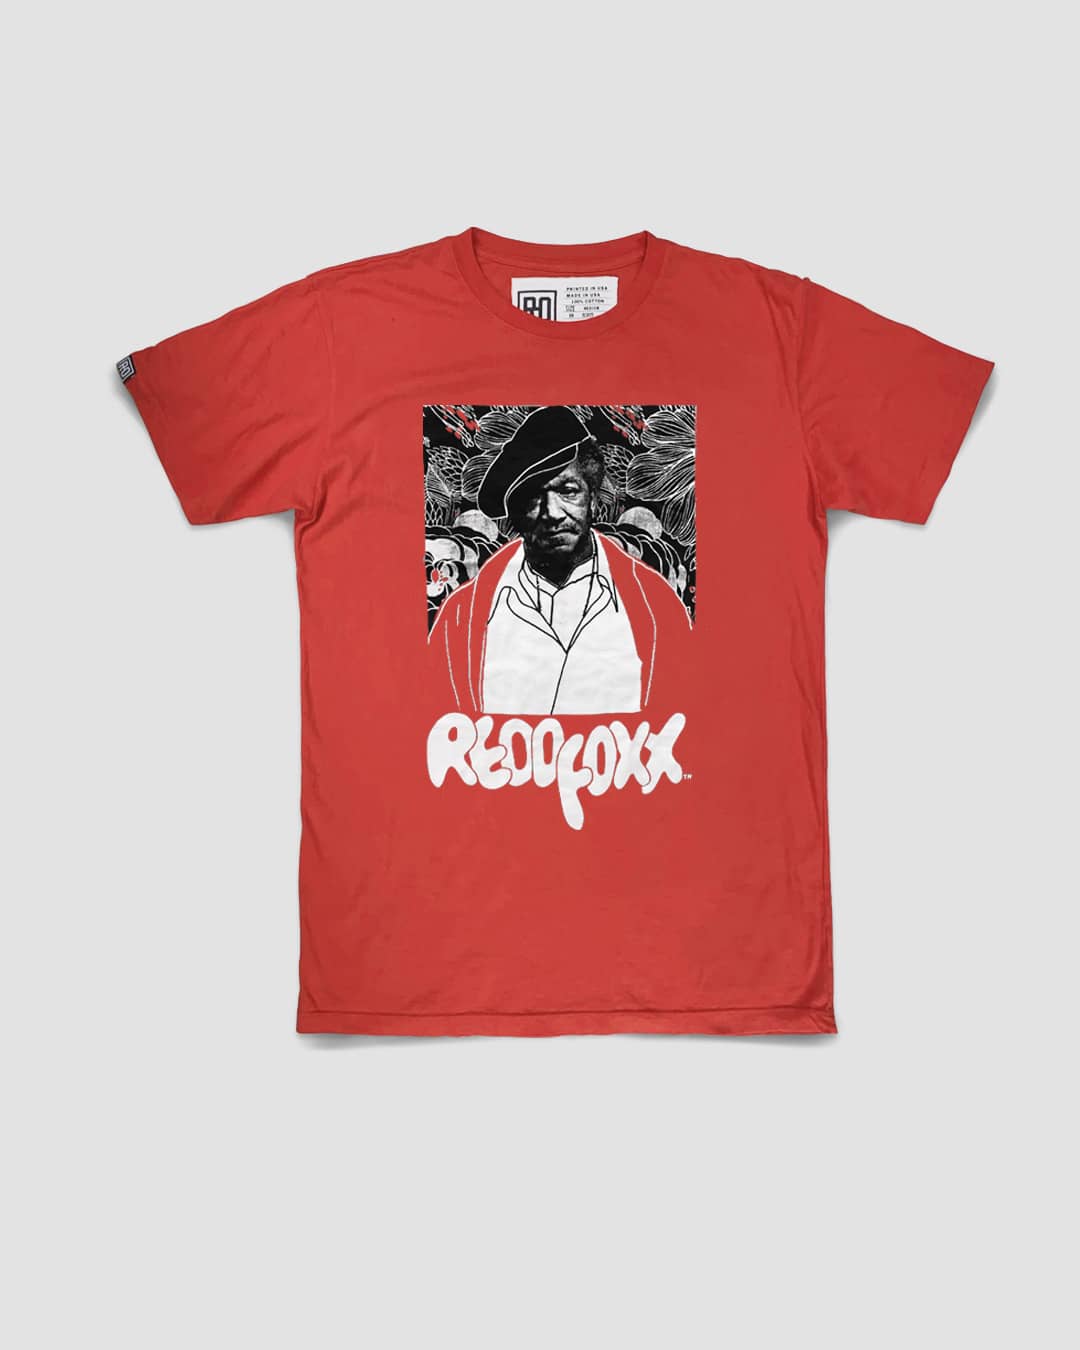 Redd Foxx Vintage Red Cover Photo Tee - Roots of Inc dba Roots of Fight